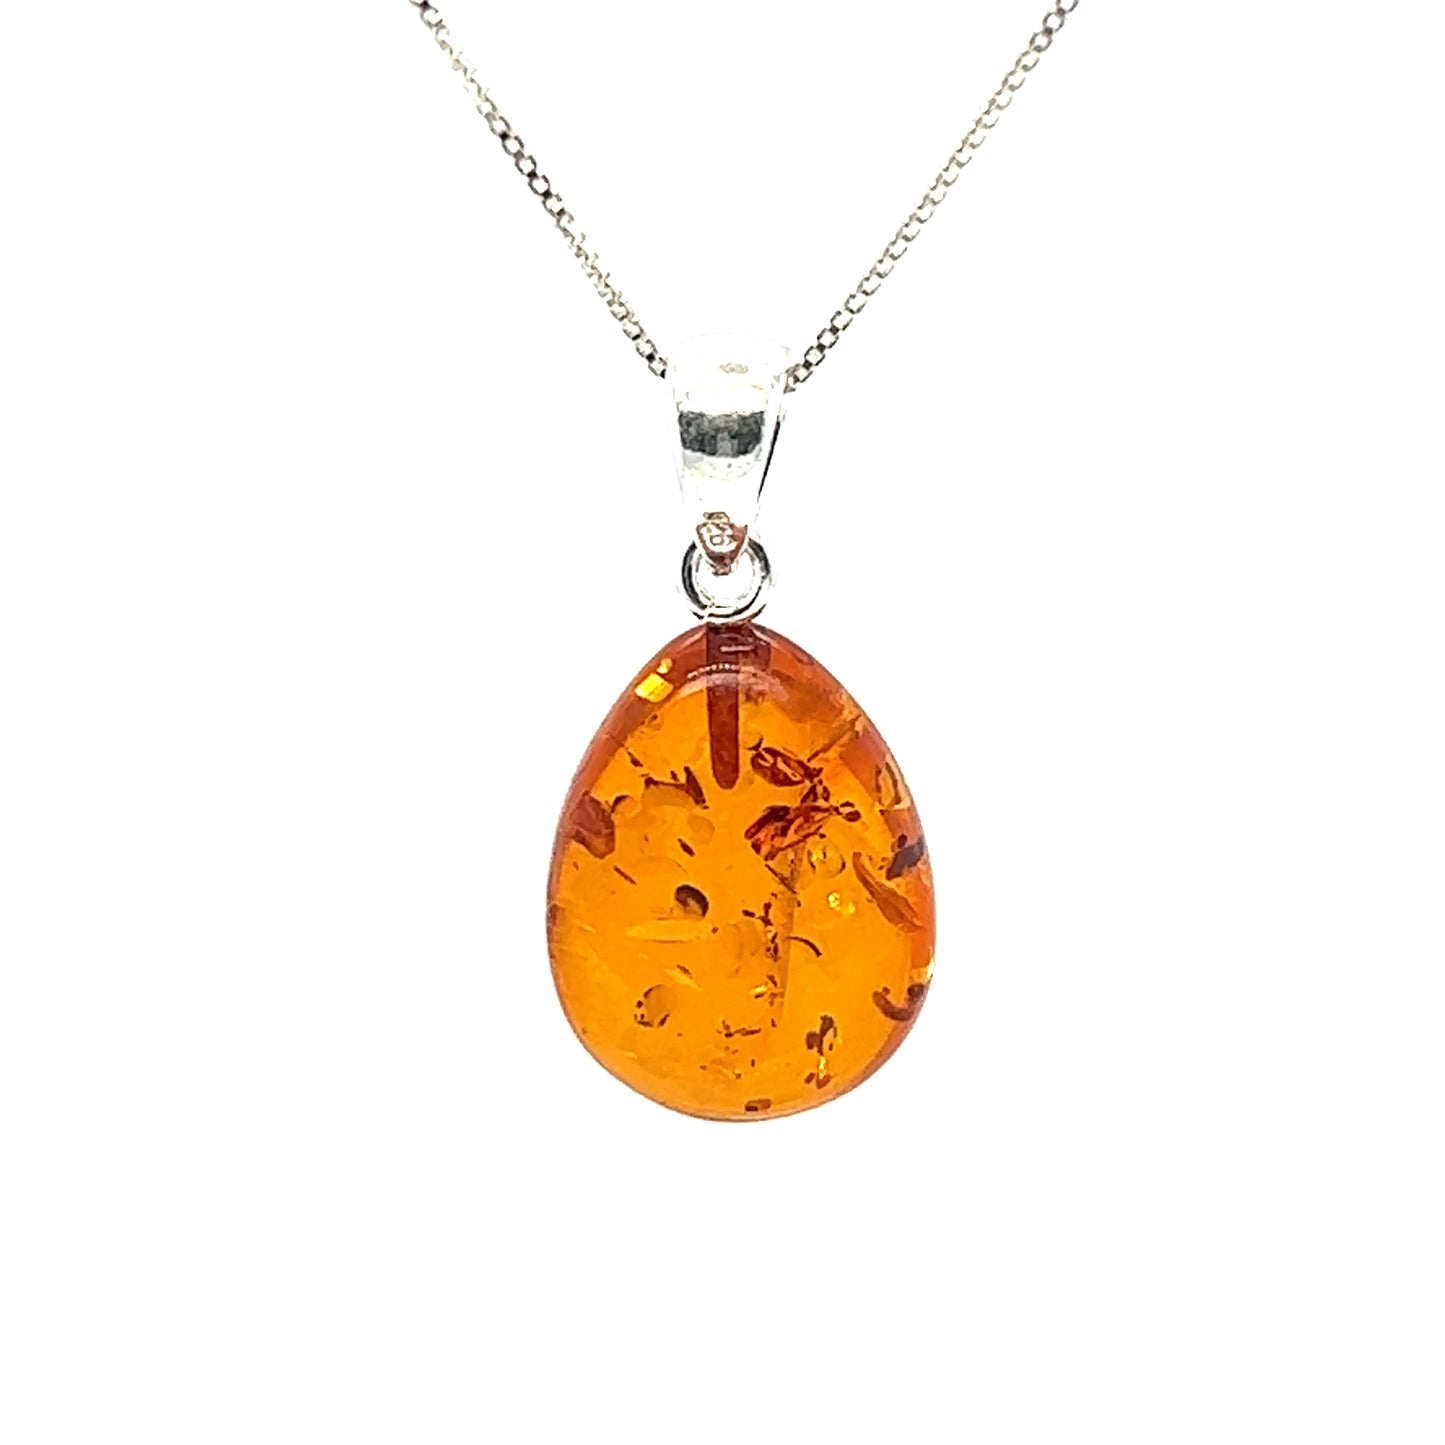 A Super Silver Teardrop Amber Pendant necklace exuding healing energy, perfect for boho minimalism.